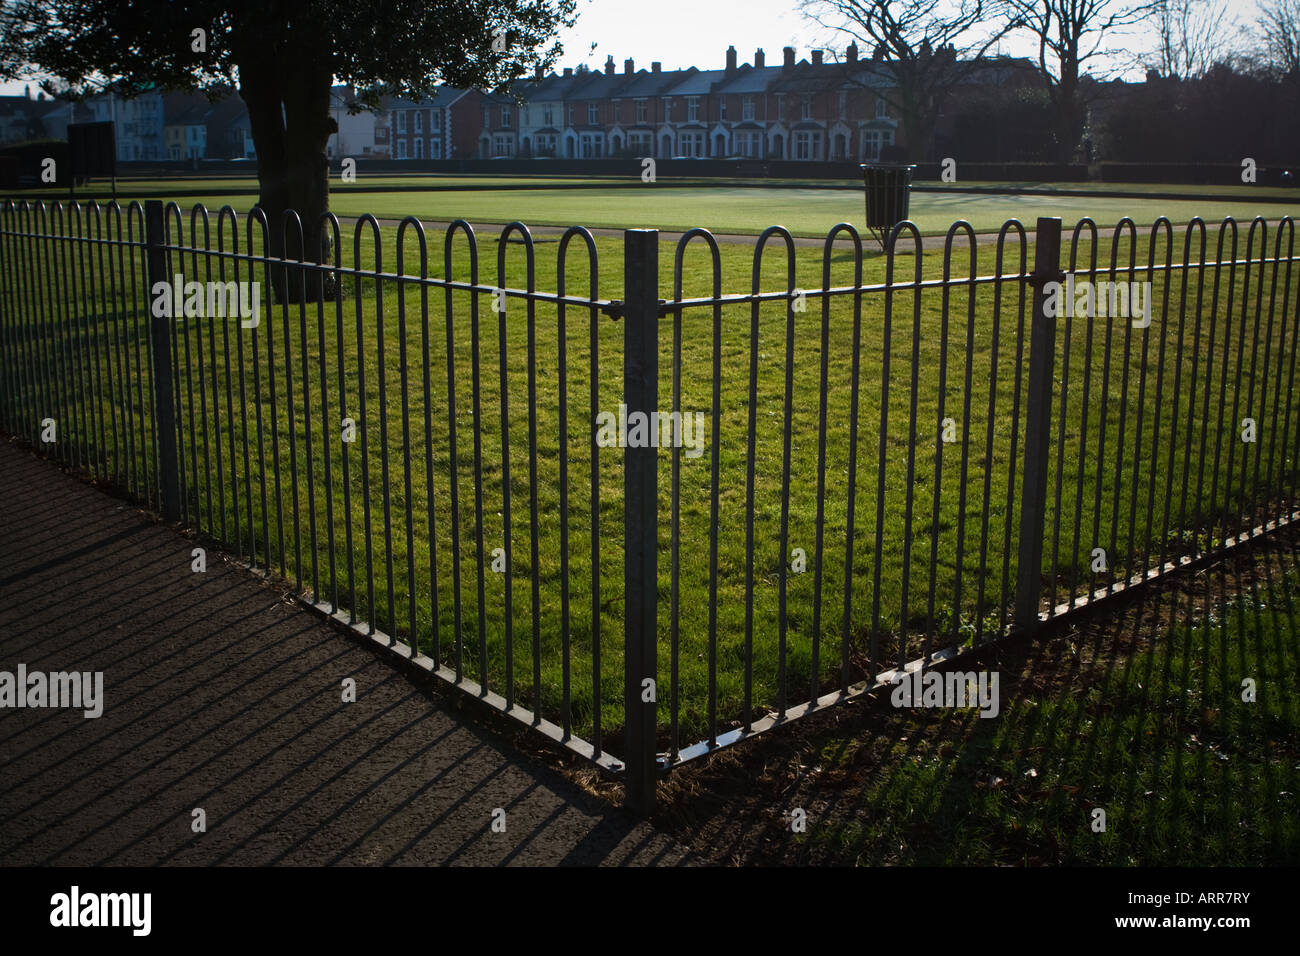 The fence round the bowling greens by Victoria Park, Royal Leamington Spa Stock Photo